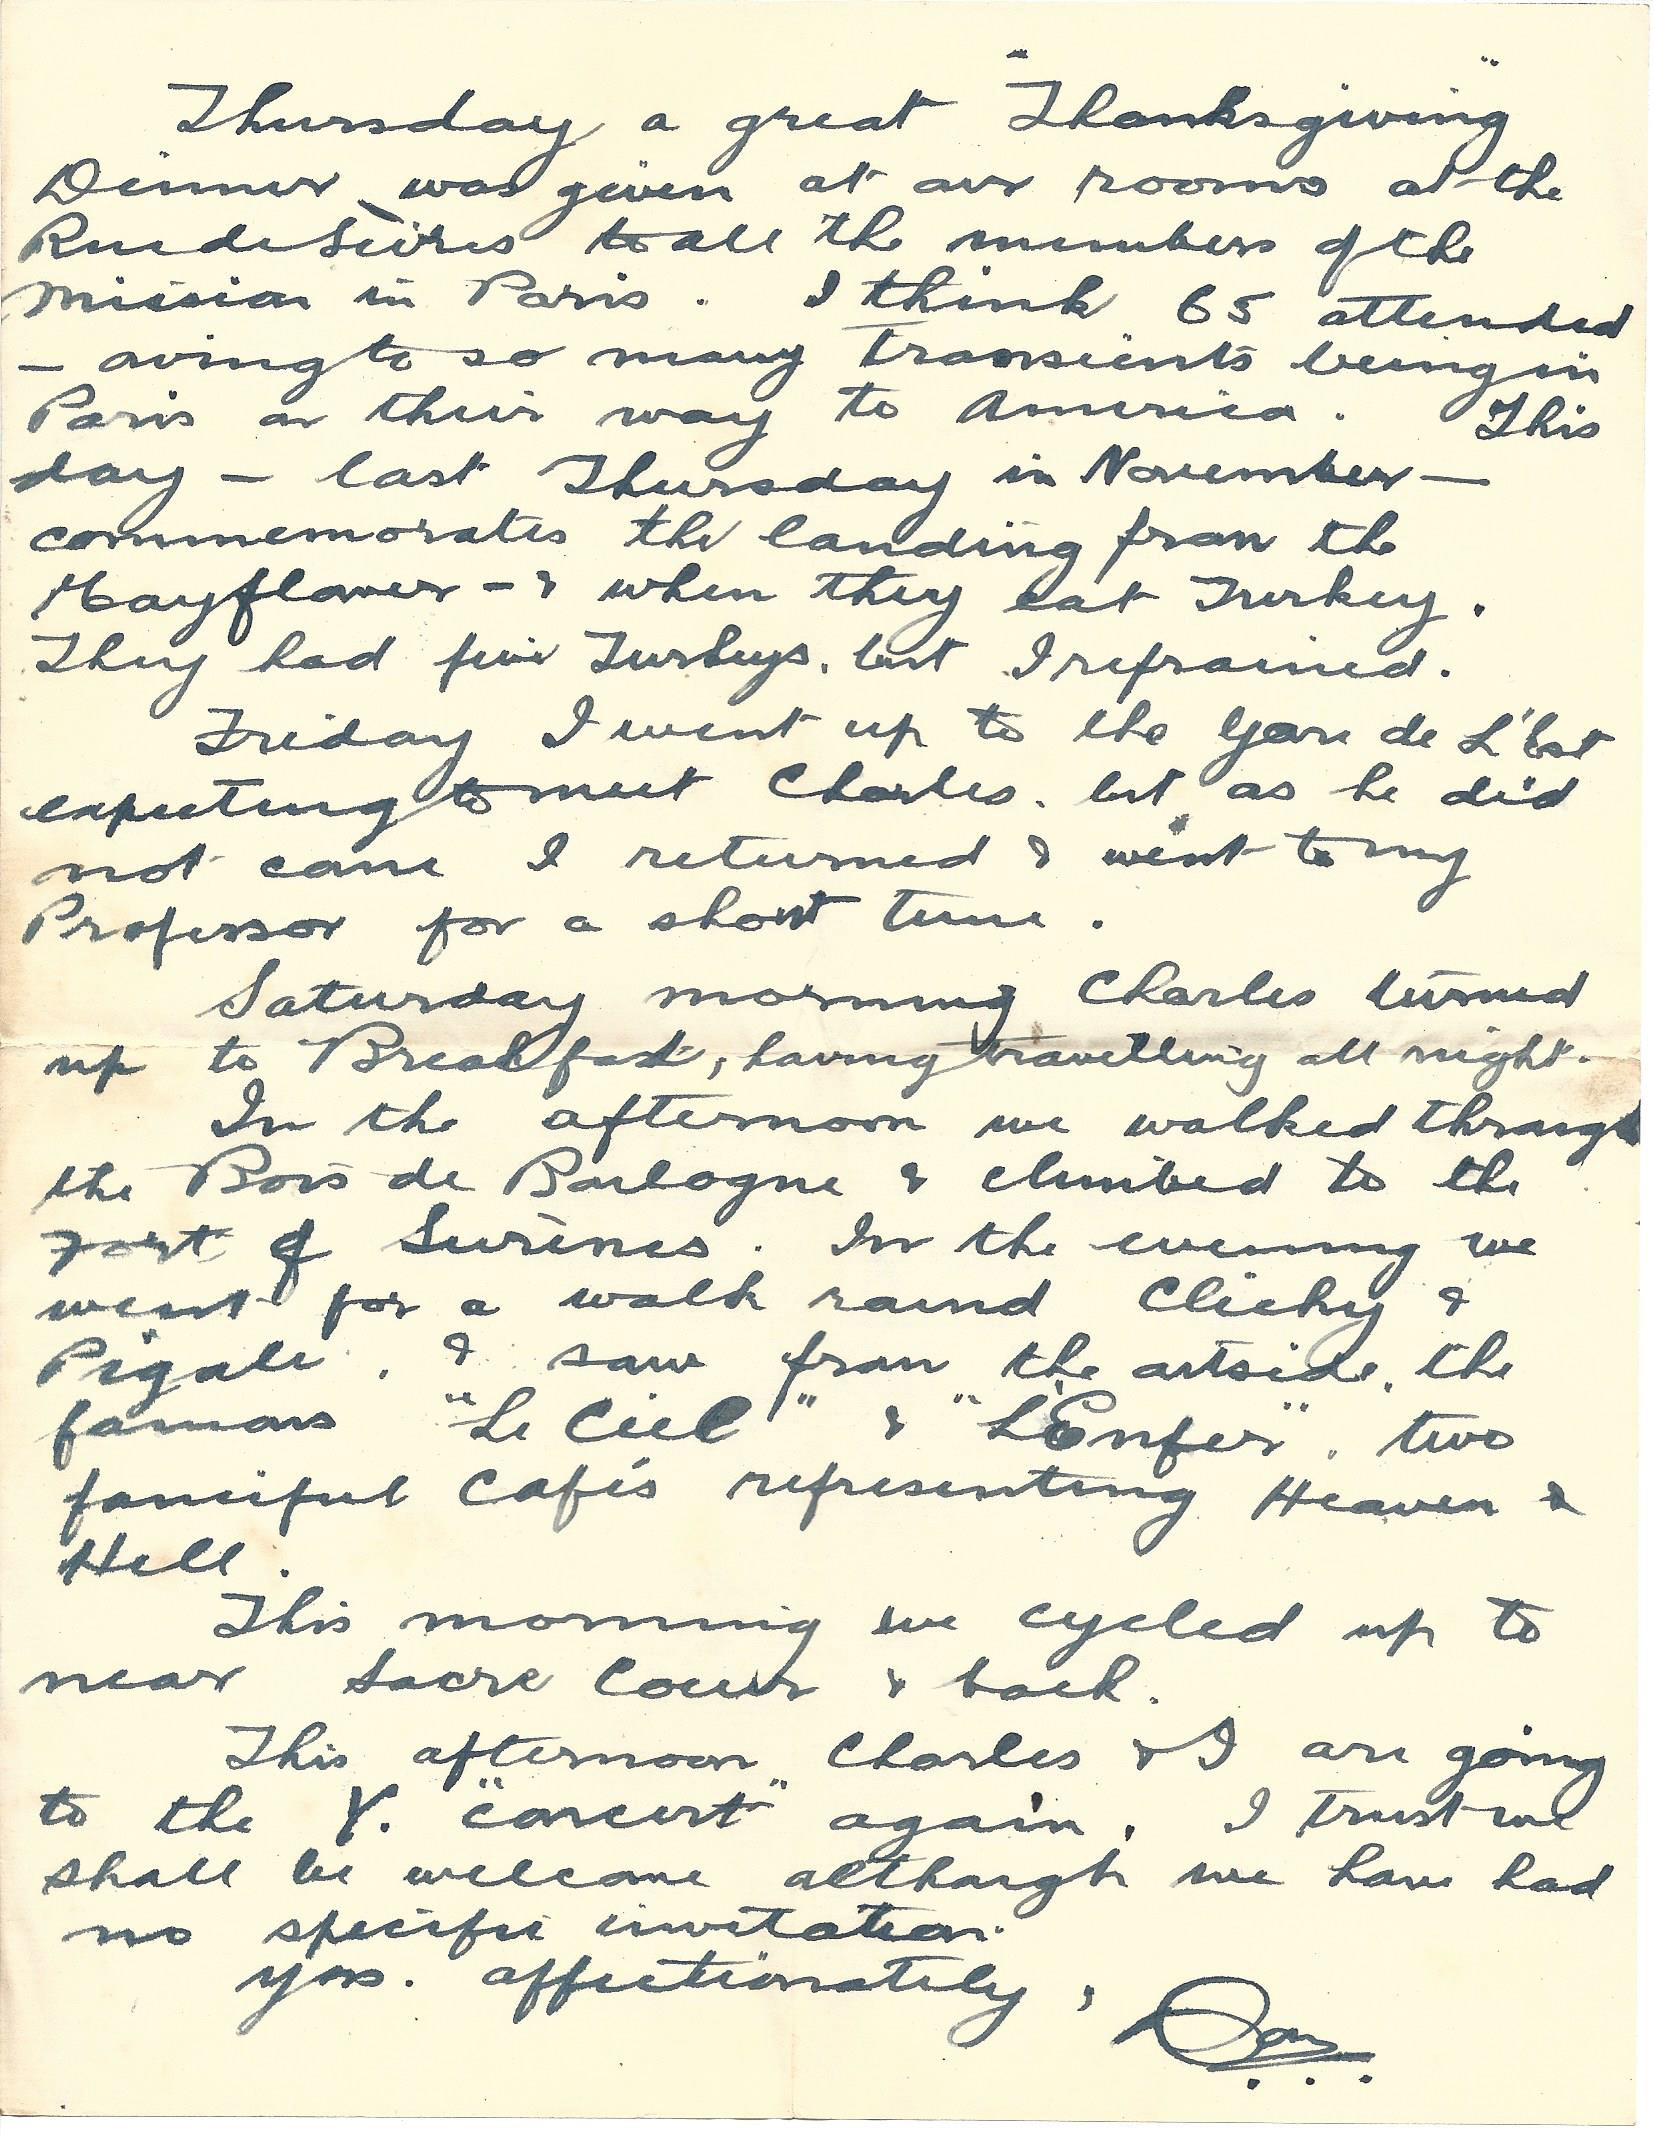 1919-11-30 Page 2 letter by Donald Bearman